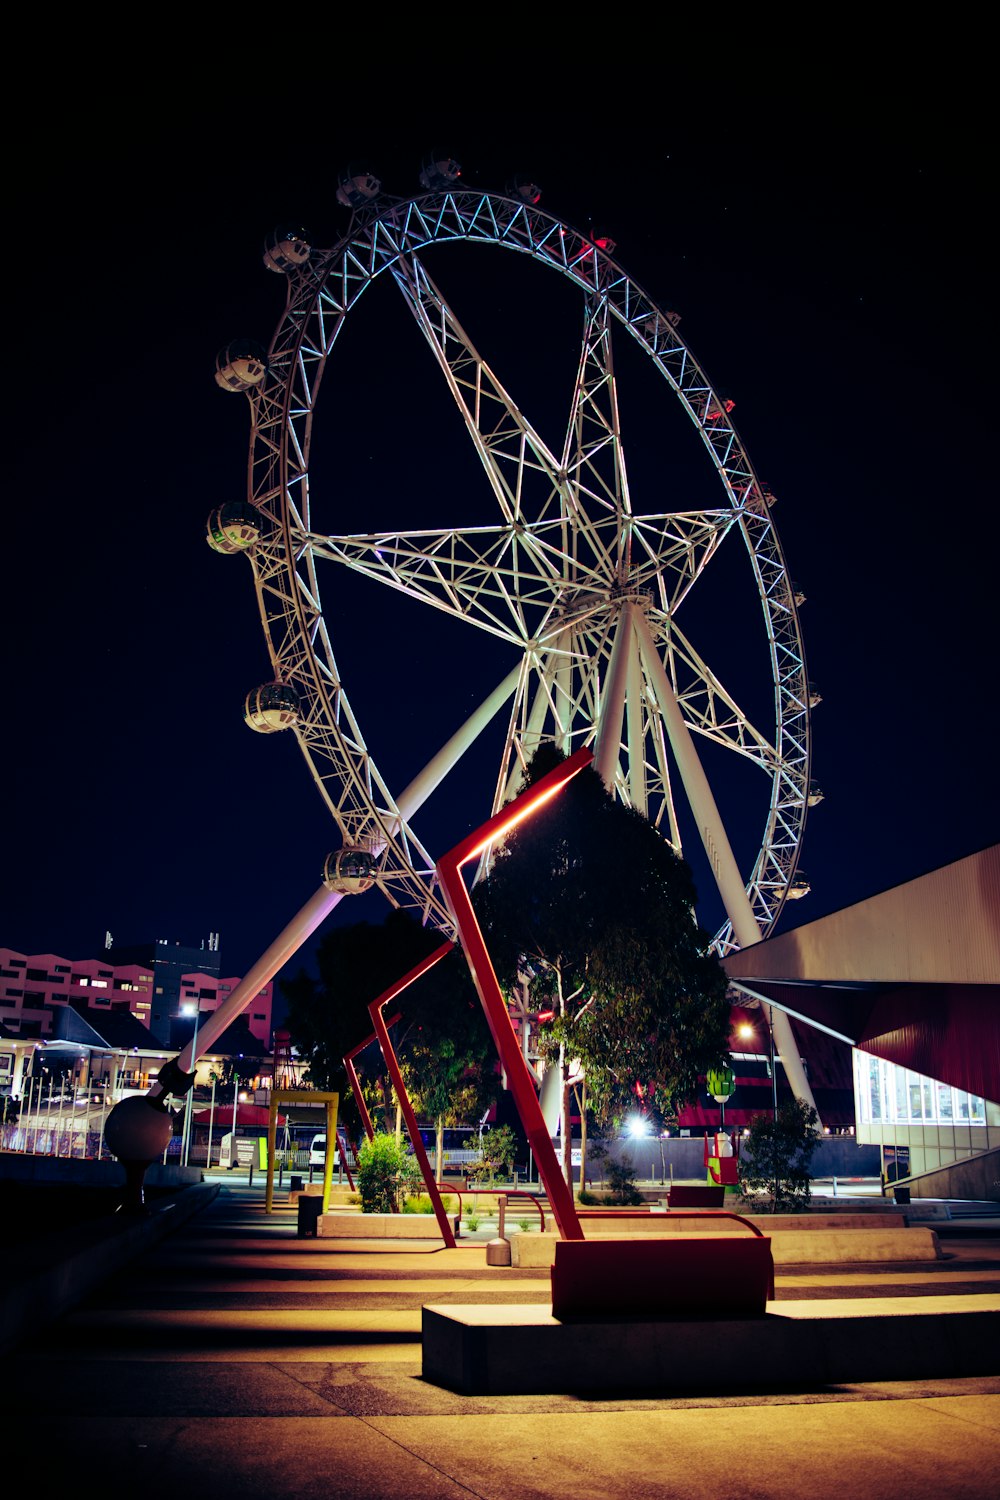 low angle photo of white and red ferris wheel